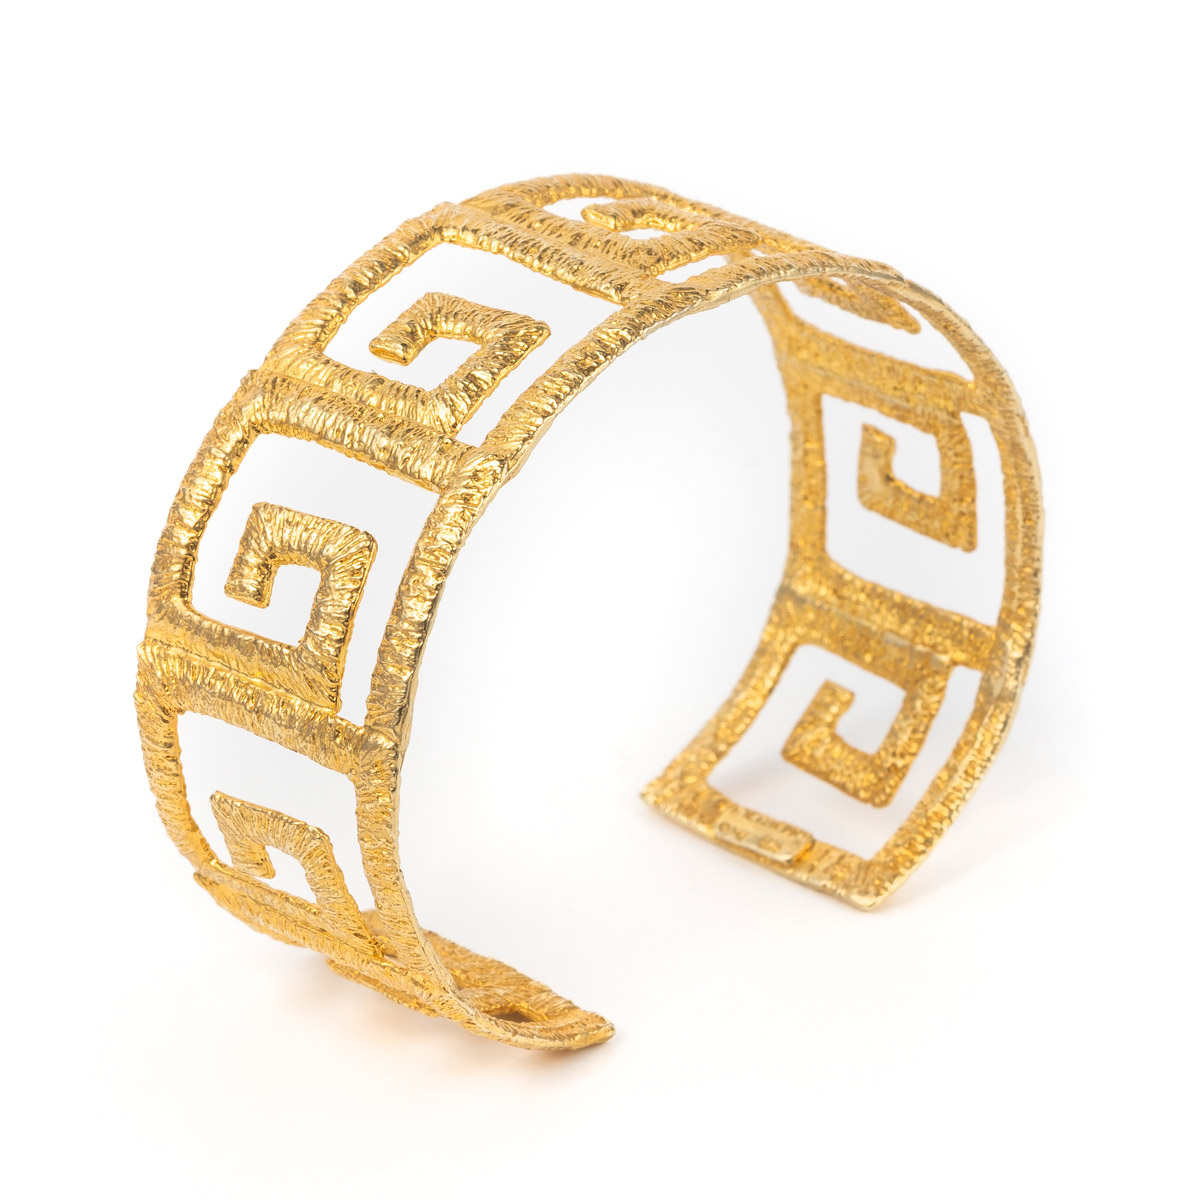 Meander Cuff Bracelet – 925 Sterling Silver and Gold Plated - GREEK ROOTS